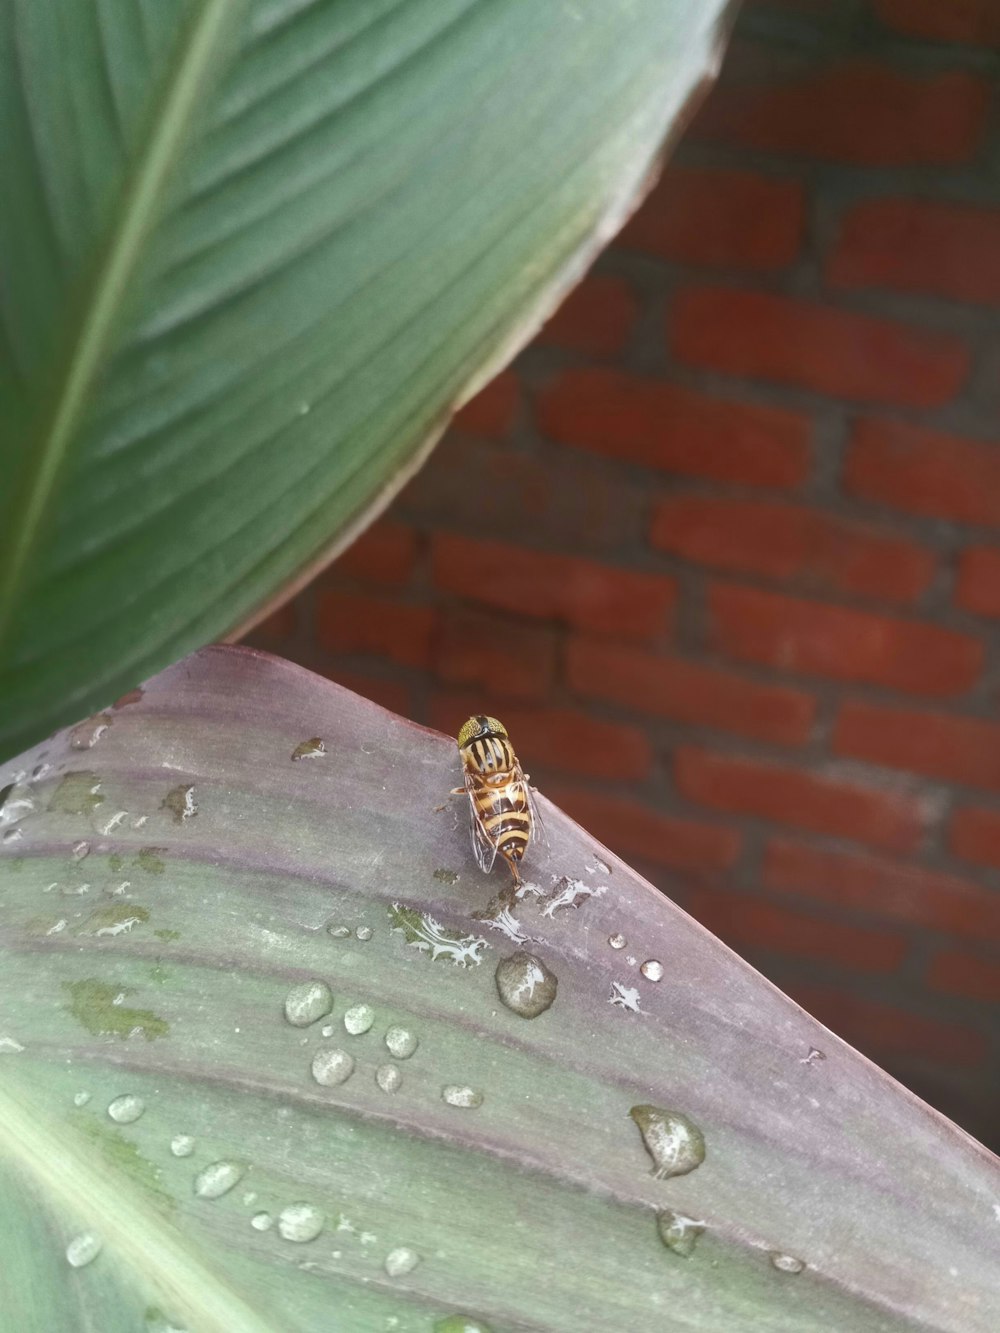 a plant with a bug on it